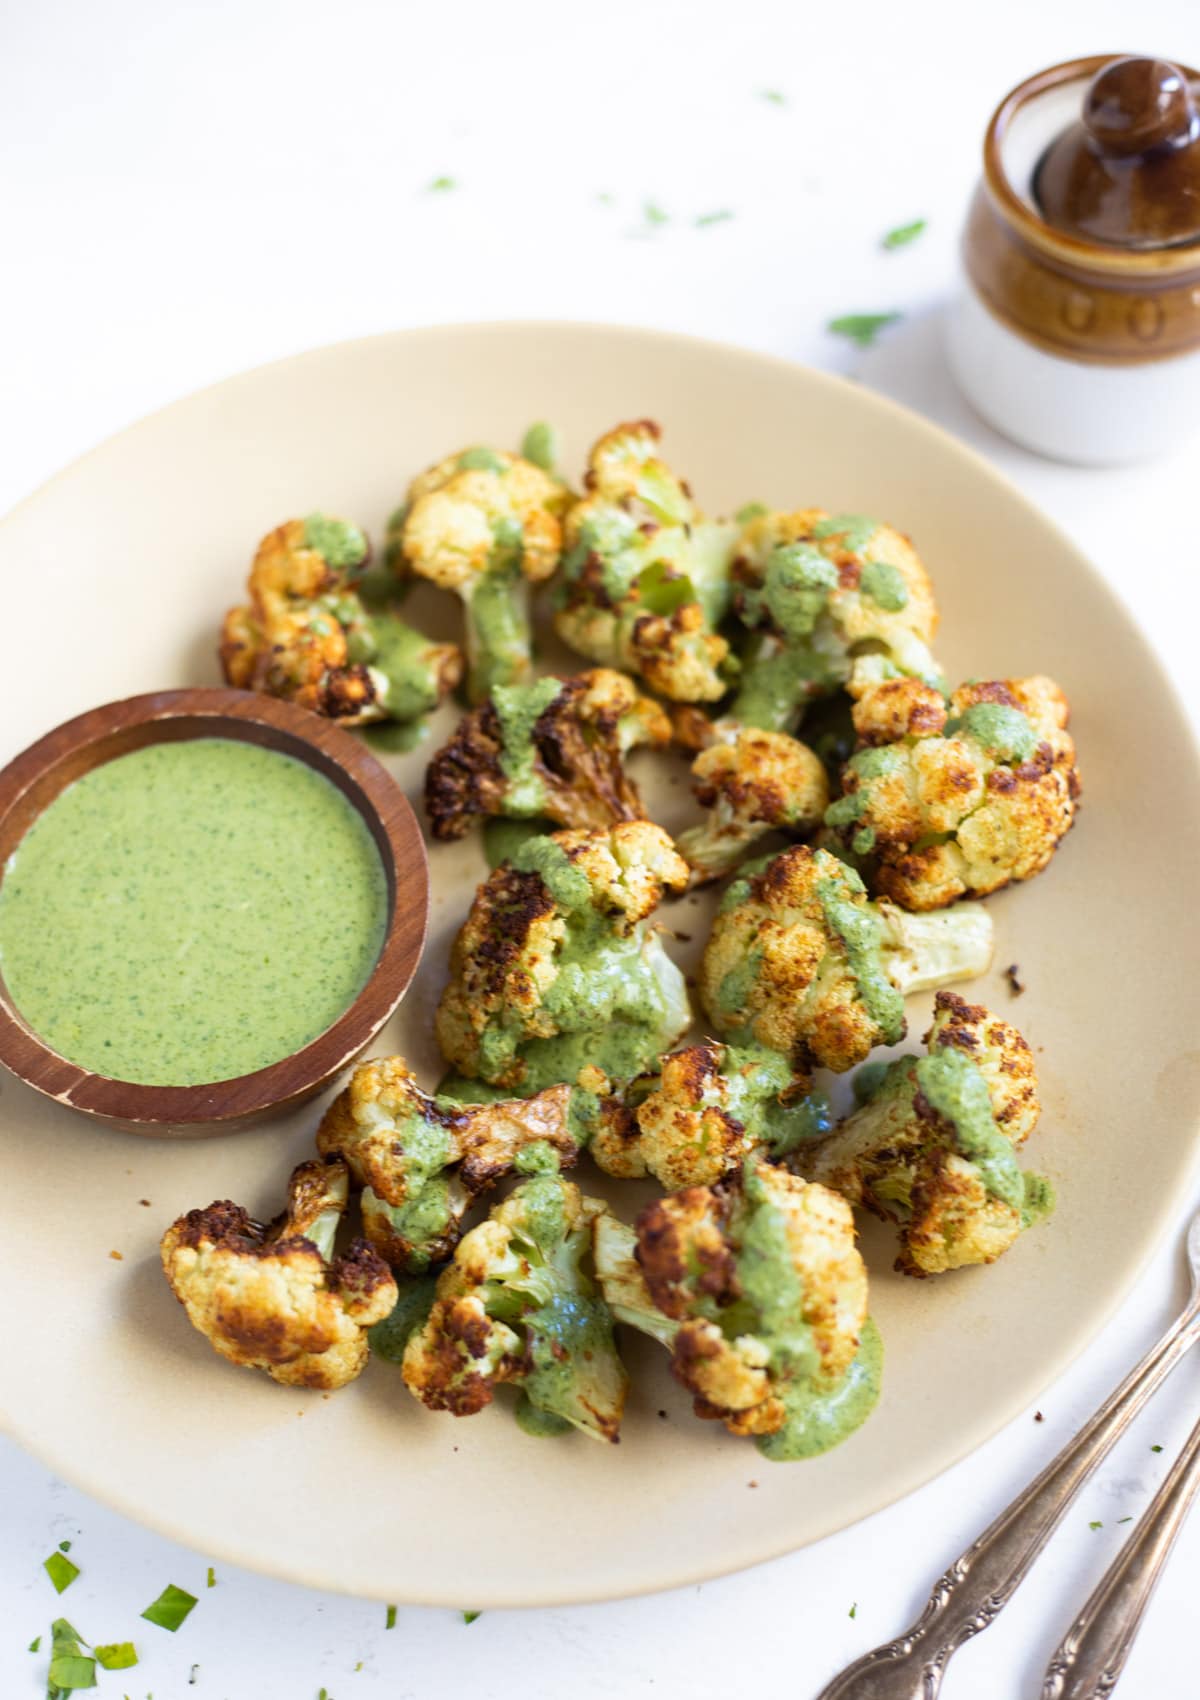 Roasted cauliflower topped with green cilantro sauce